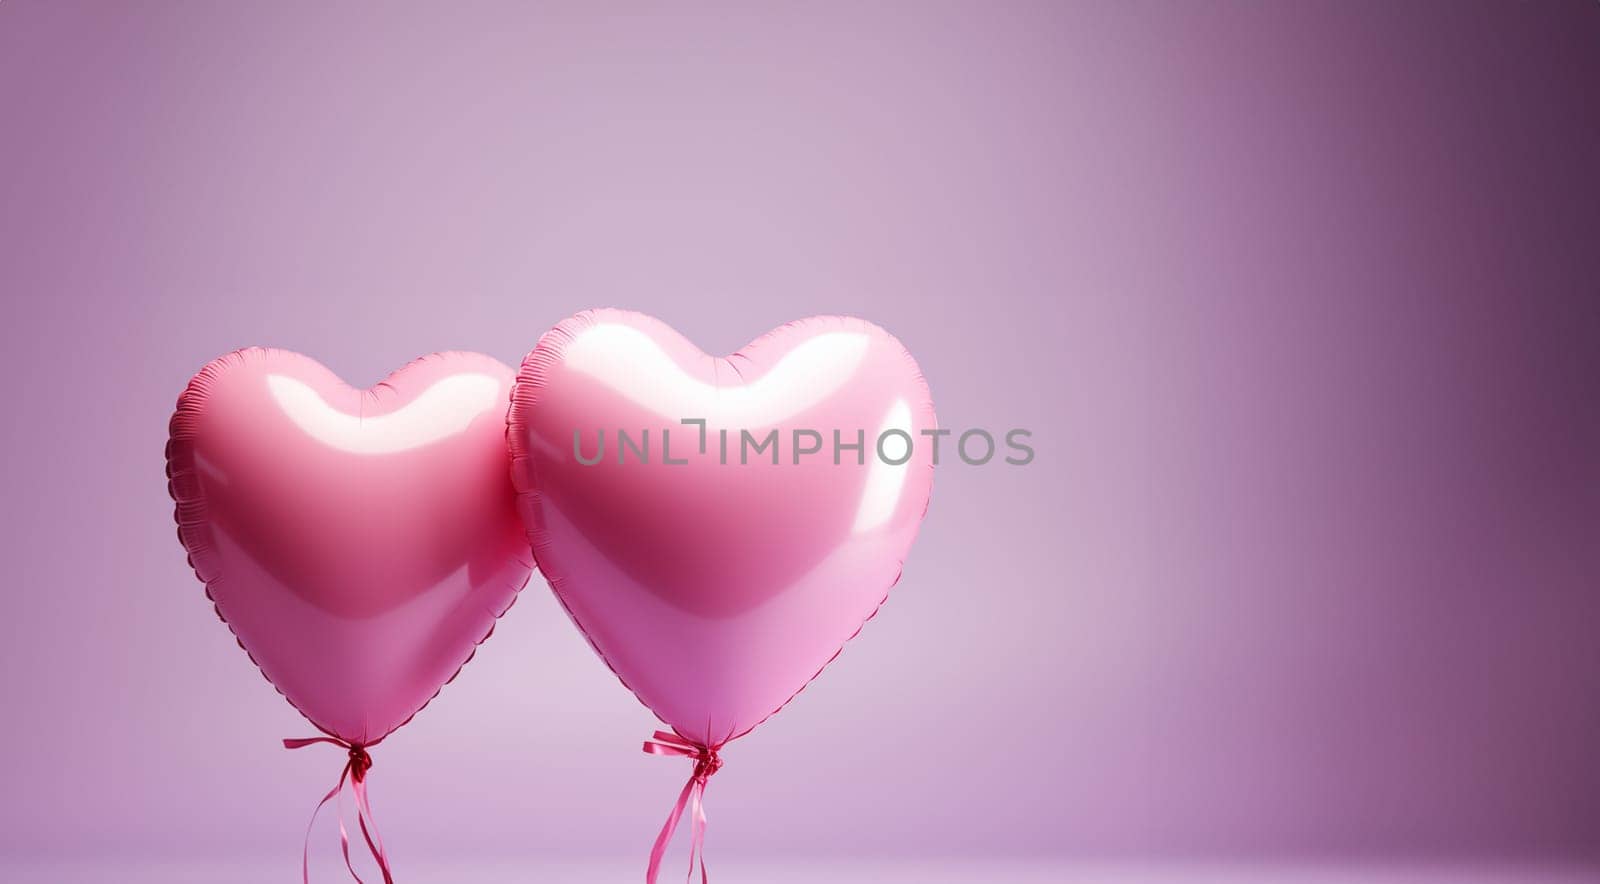 Two pink heart shaped balloons on pastel pink background copy space. Valentine romantic theme deign 3D. Valentine's day background. Space for text